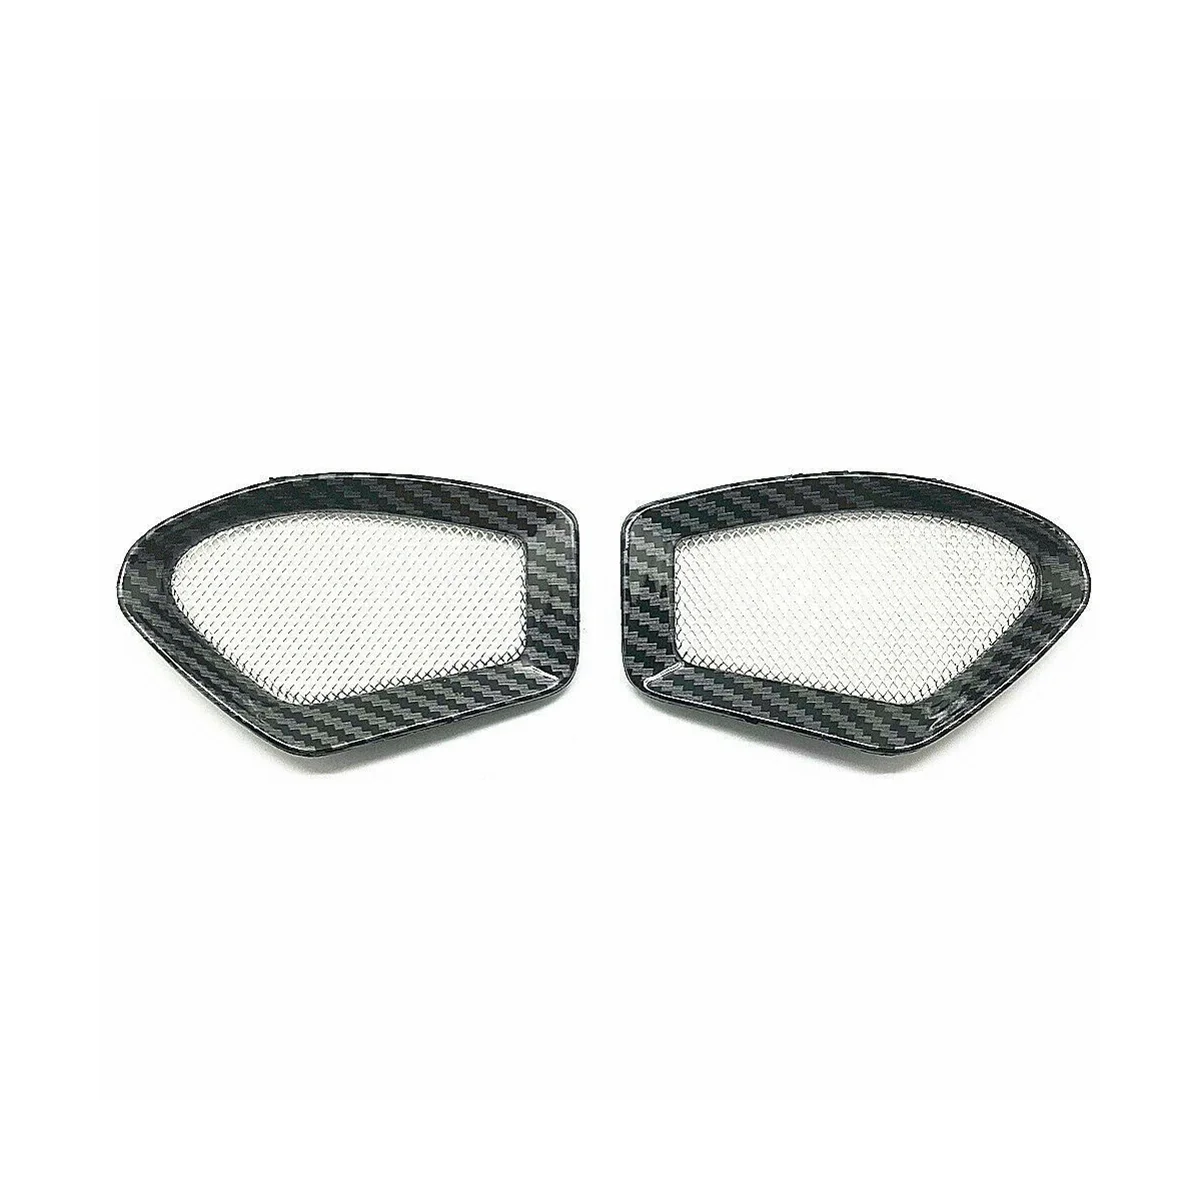 

Motorcycle Front Air Intake Grille Cover Gas Tank Air Intake Vent Cover Fairing Cowl Net for Ducati Monster 696 796 1100